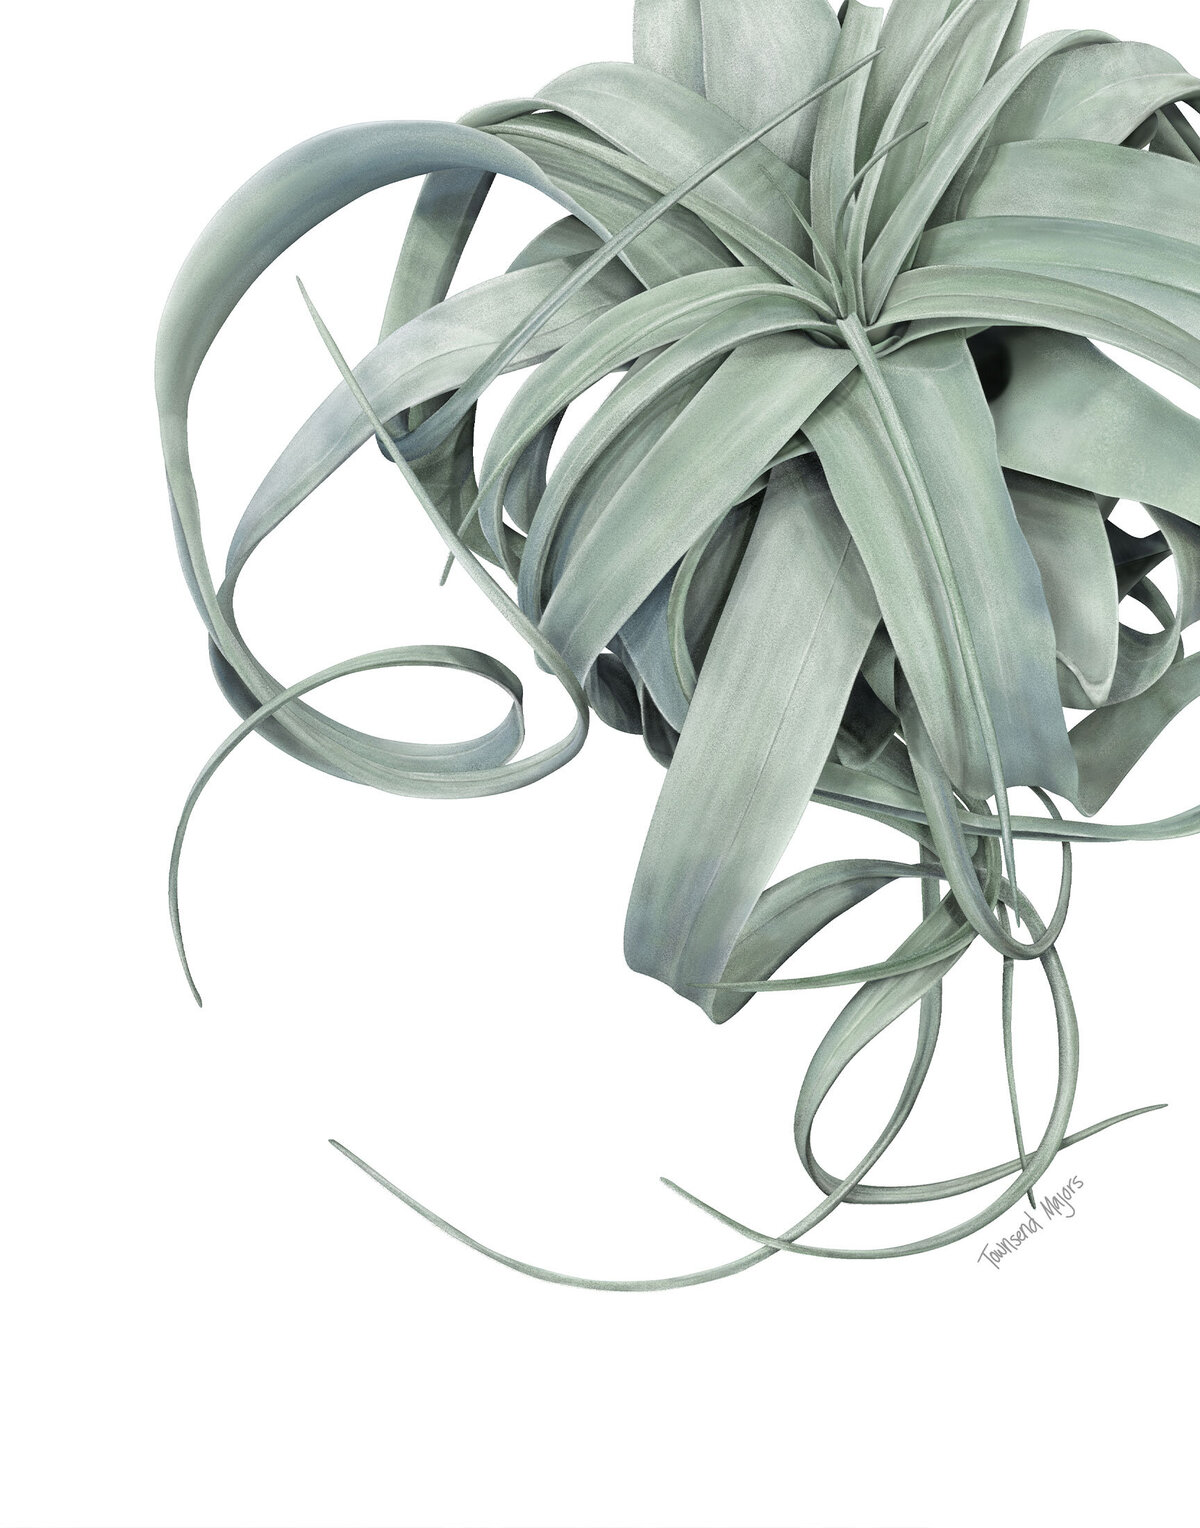 Townsend Majors' xerographica air plant illustration